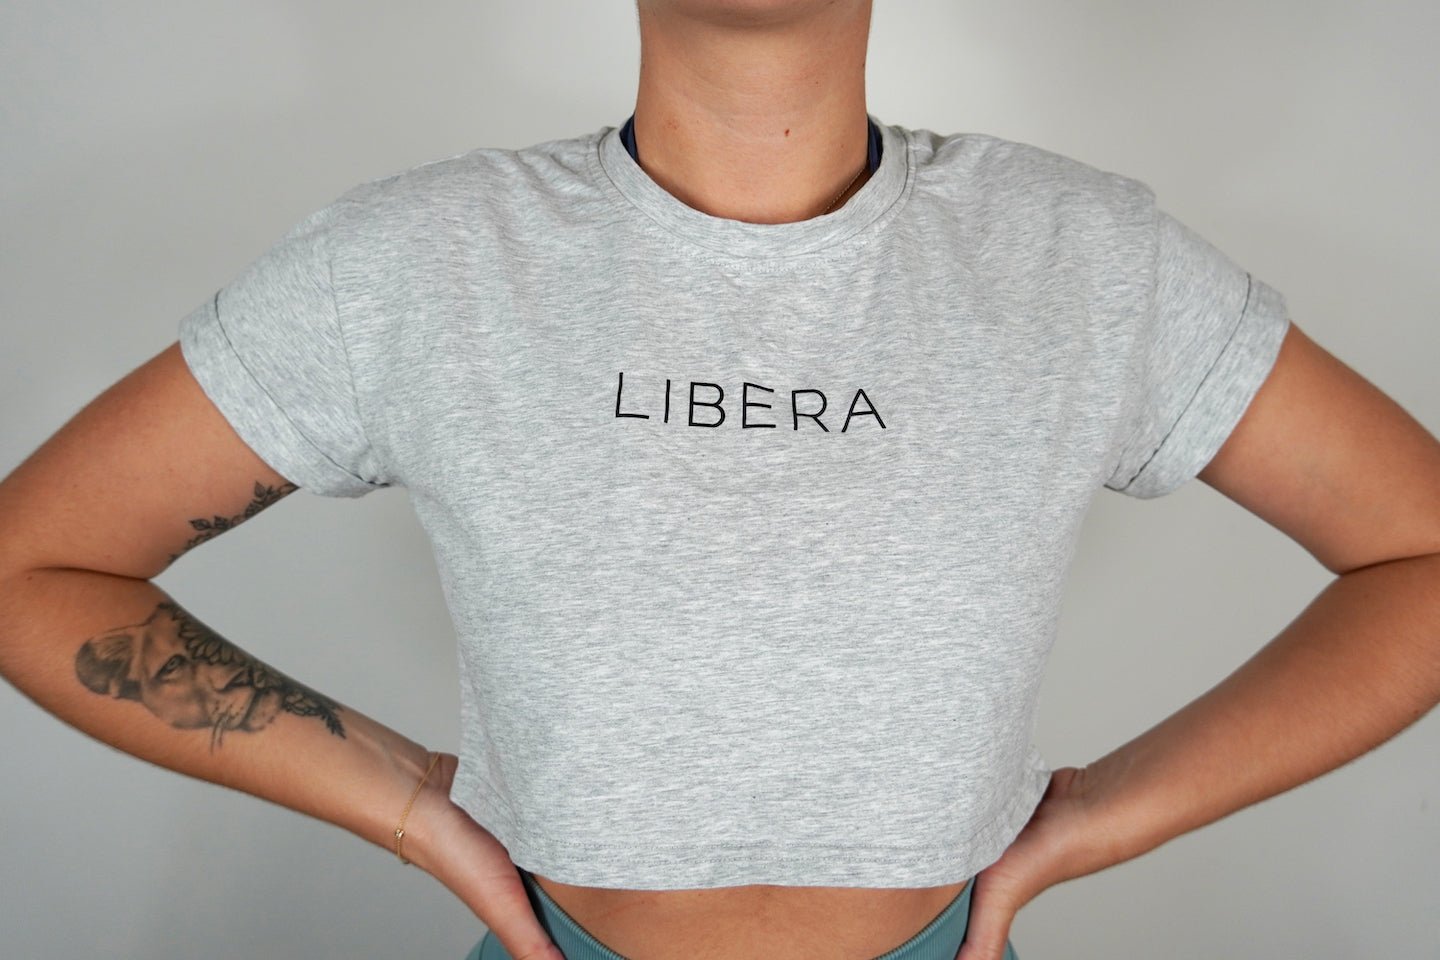 5 nutrition tips for a successful transformation - LIBERA Fitness Apparel